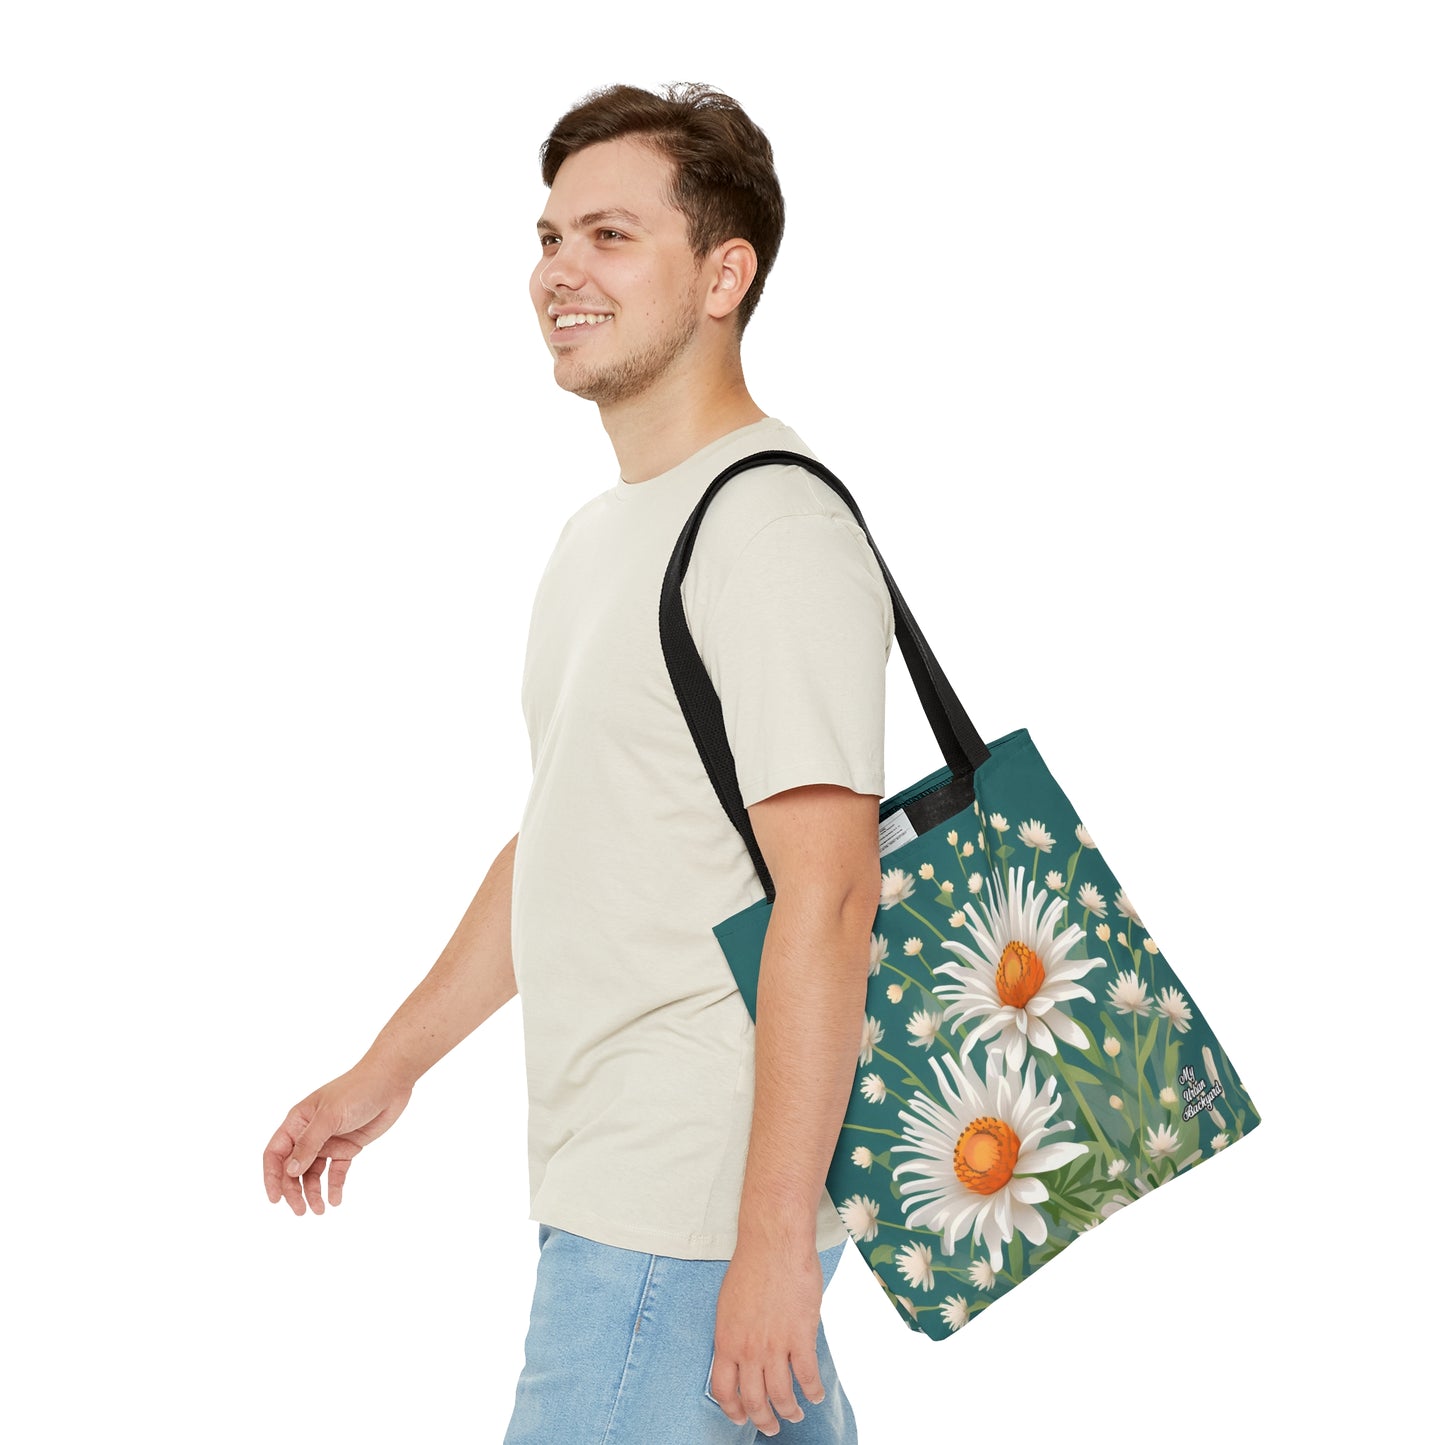 White Flowers, Tote Bag for Everyday Use - Durable and Functional